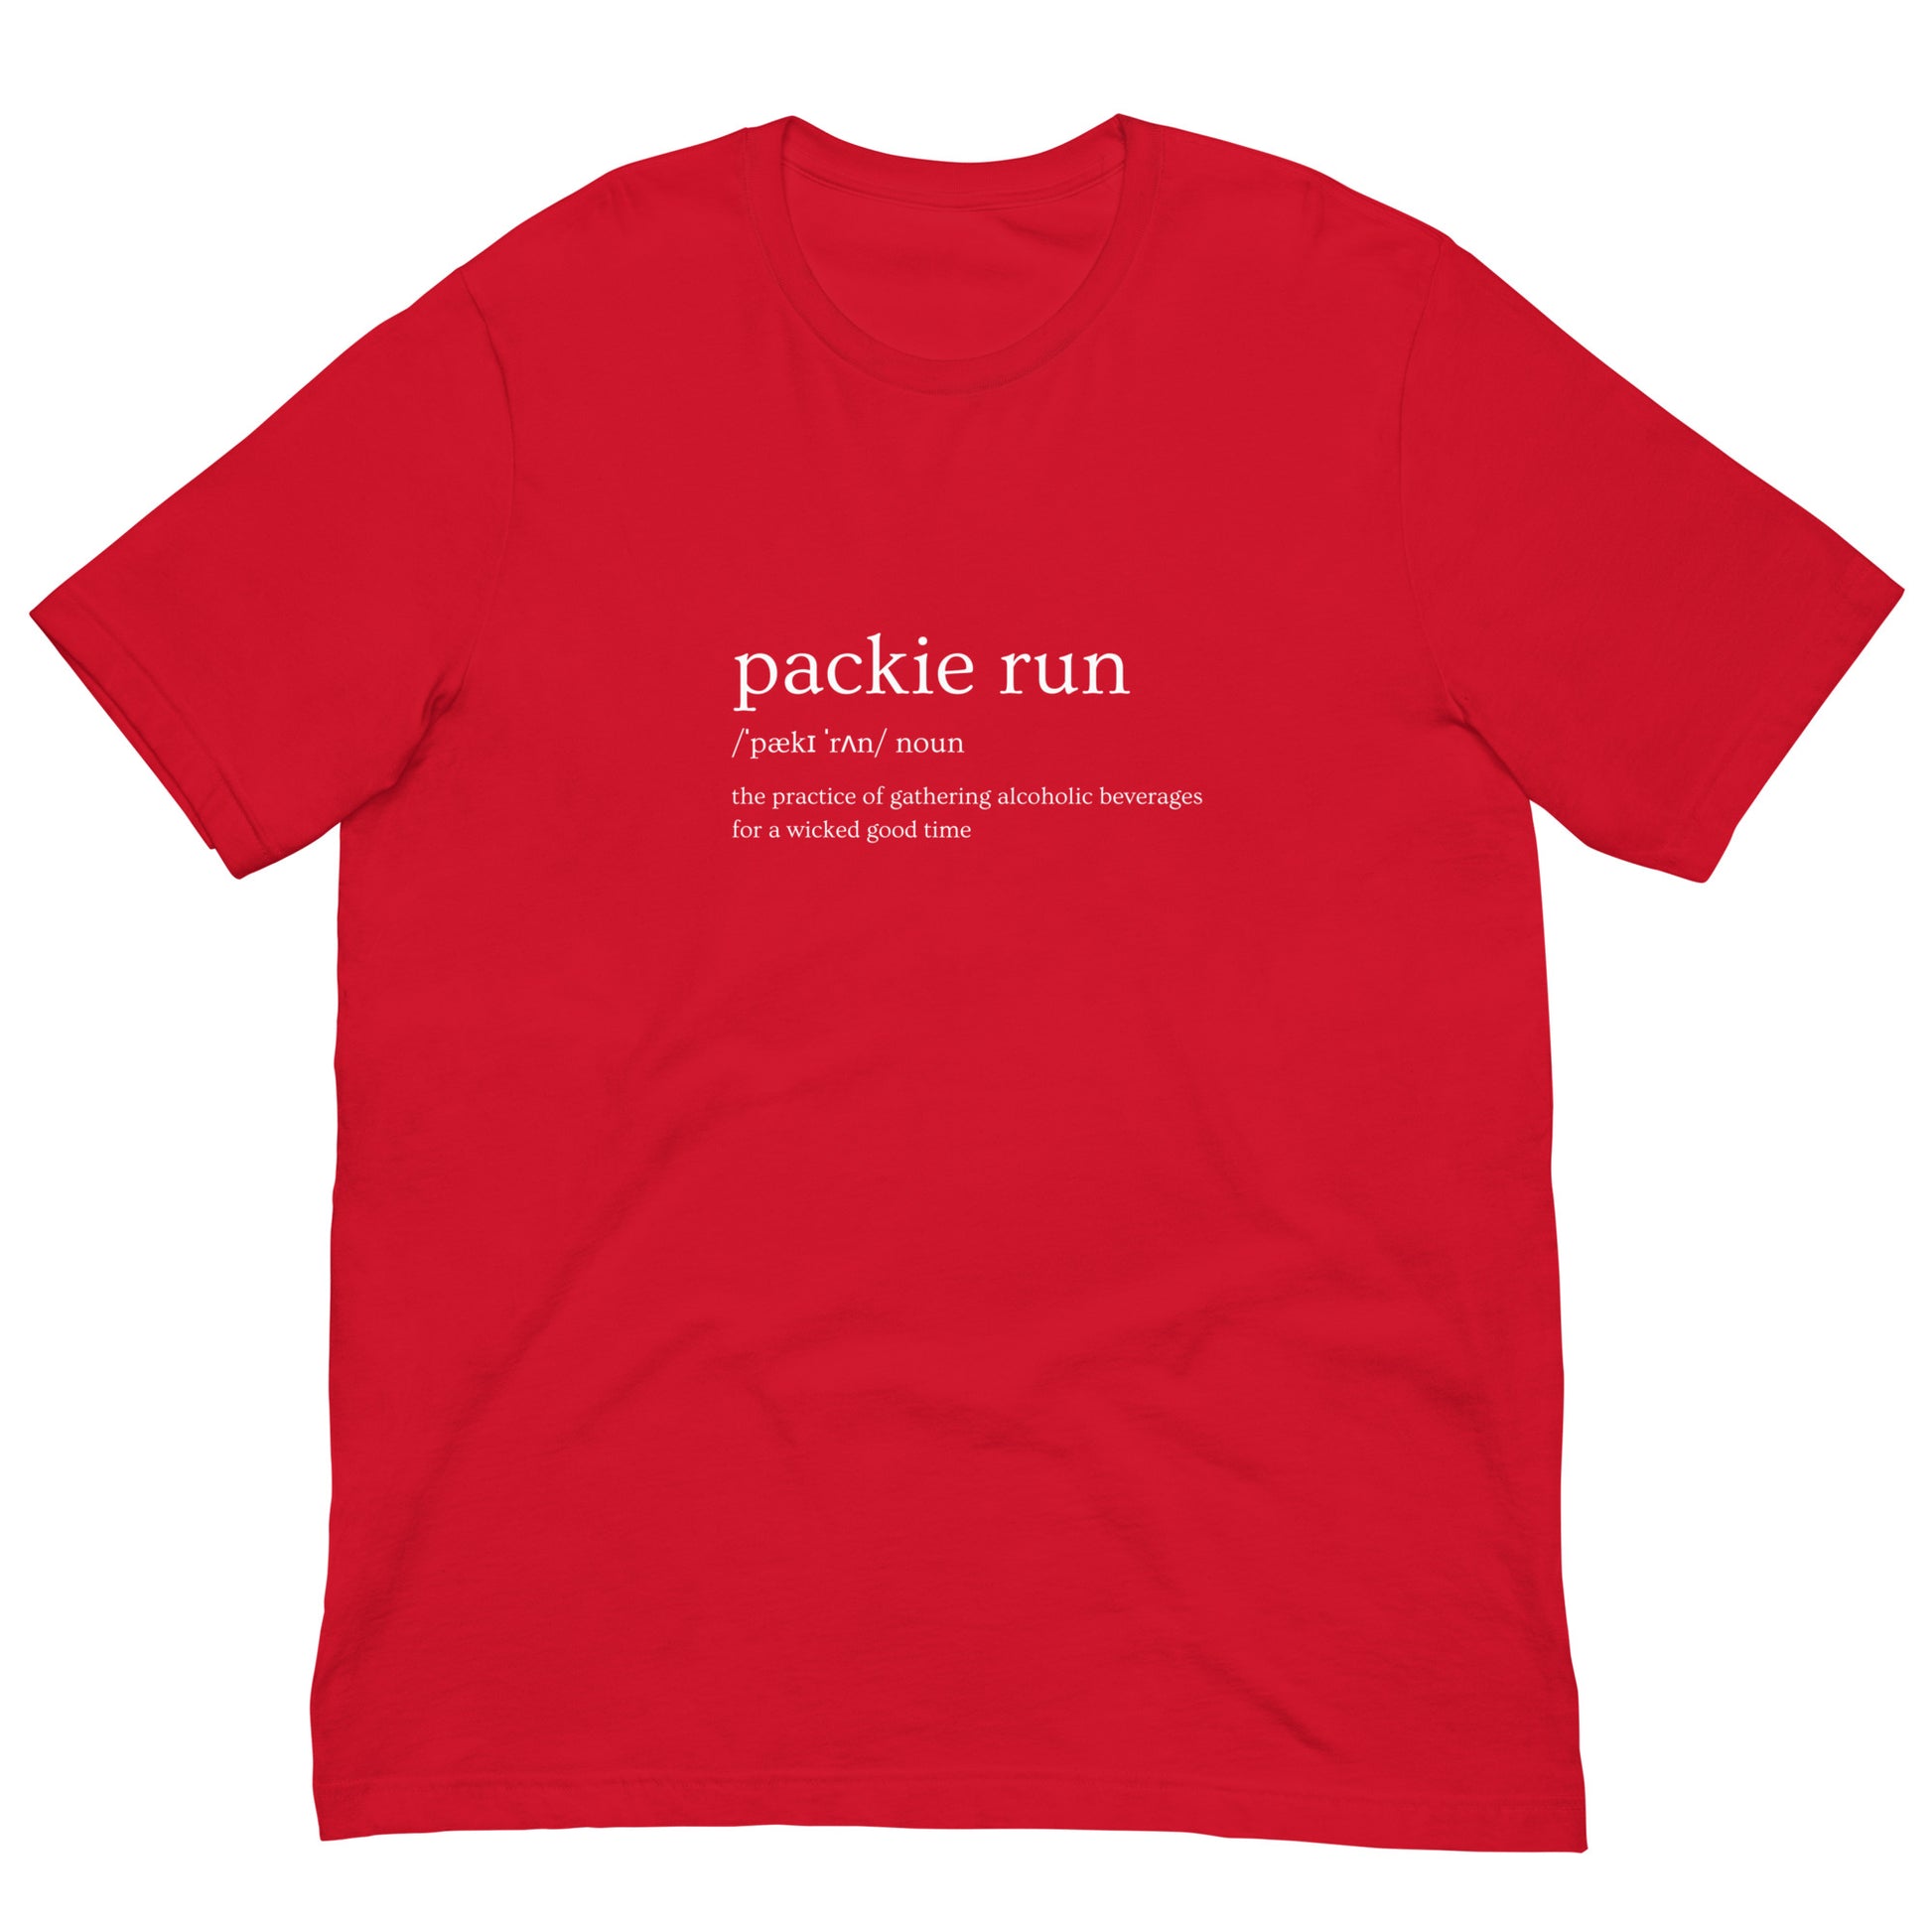 red tshirt that says "packie run, noun, the practice of gathering alcoholic beverages for a wicked good time"